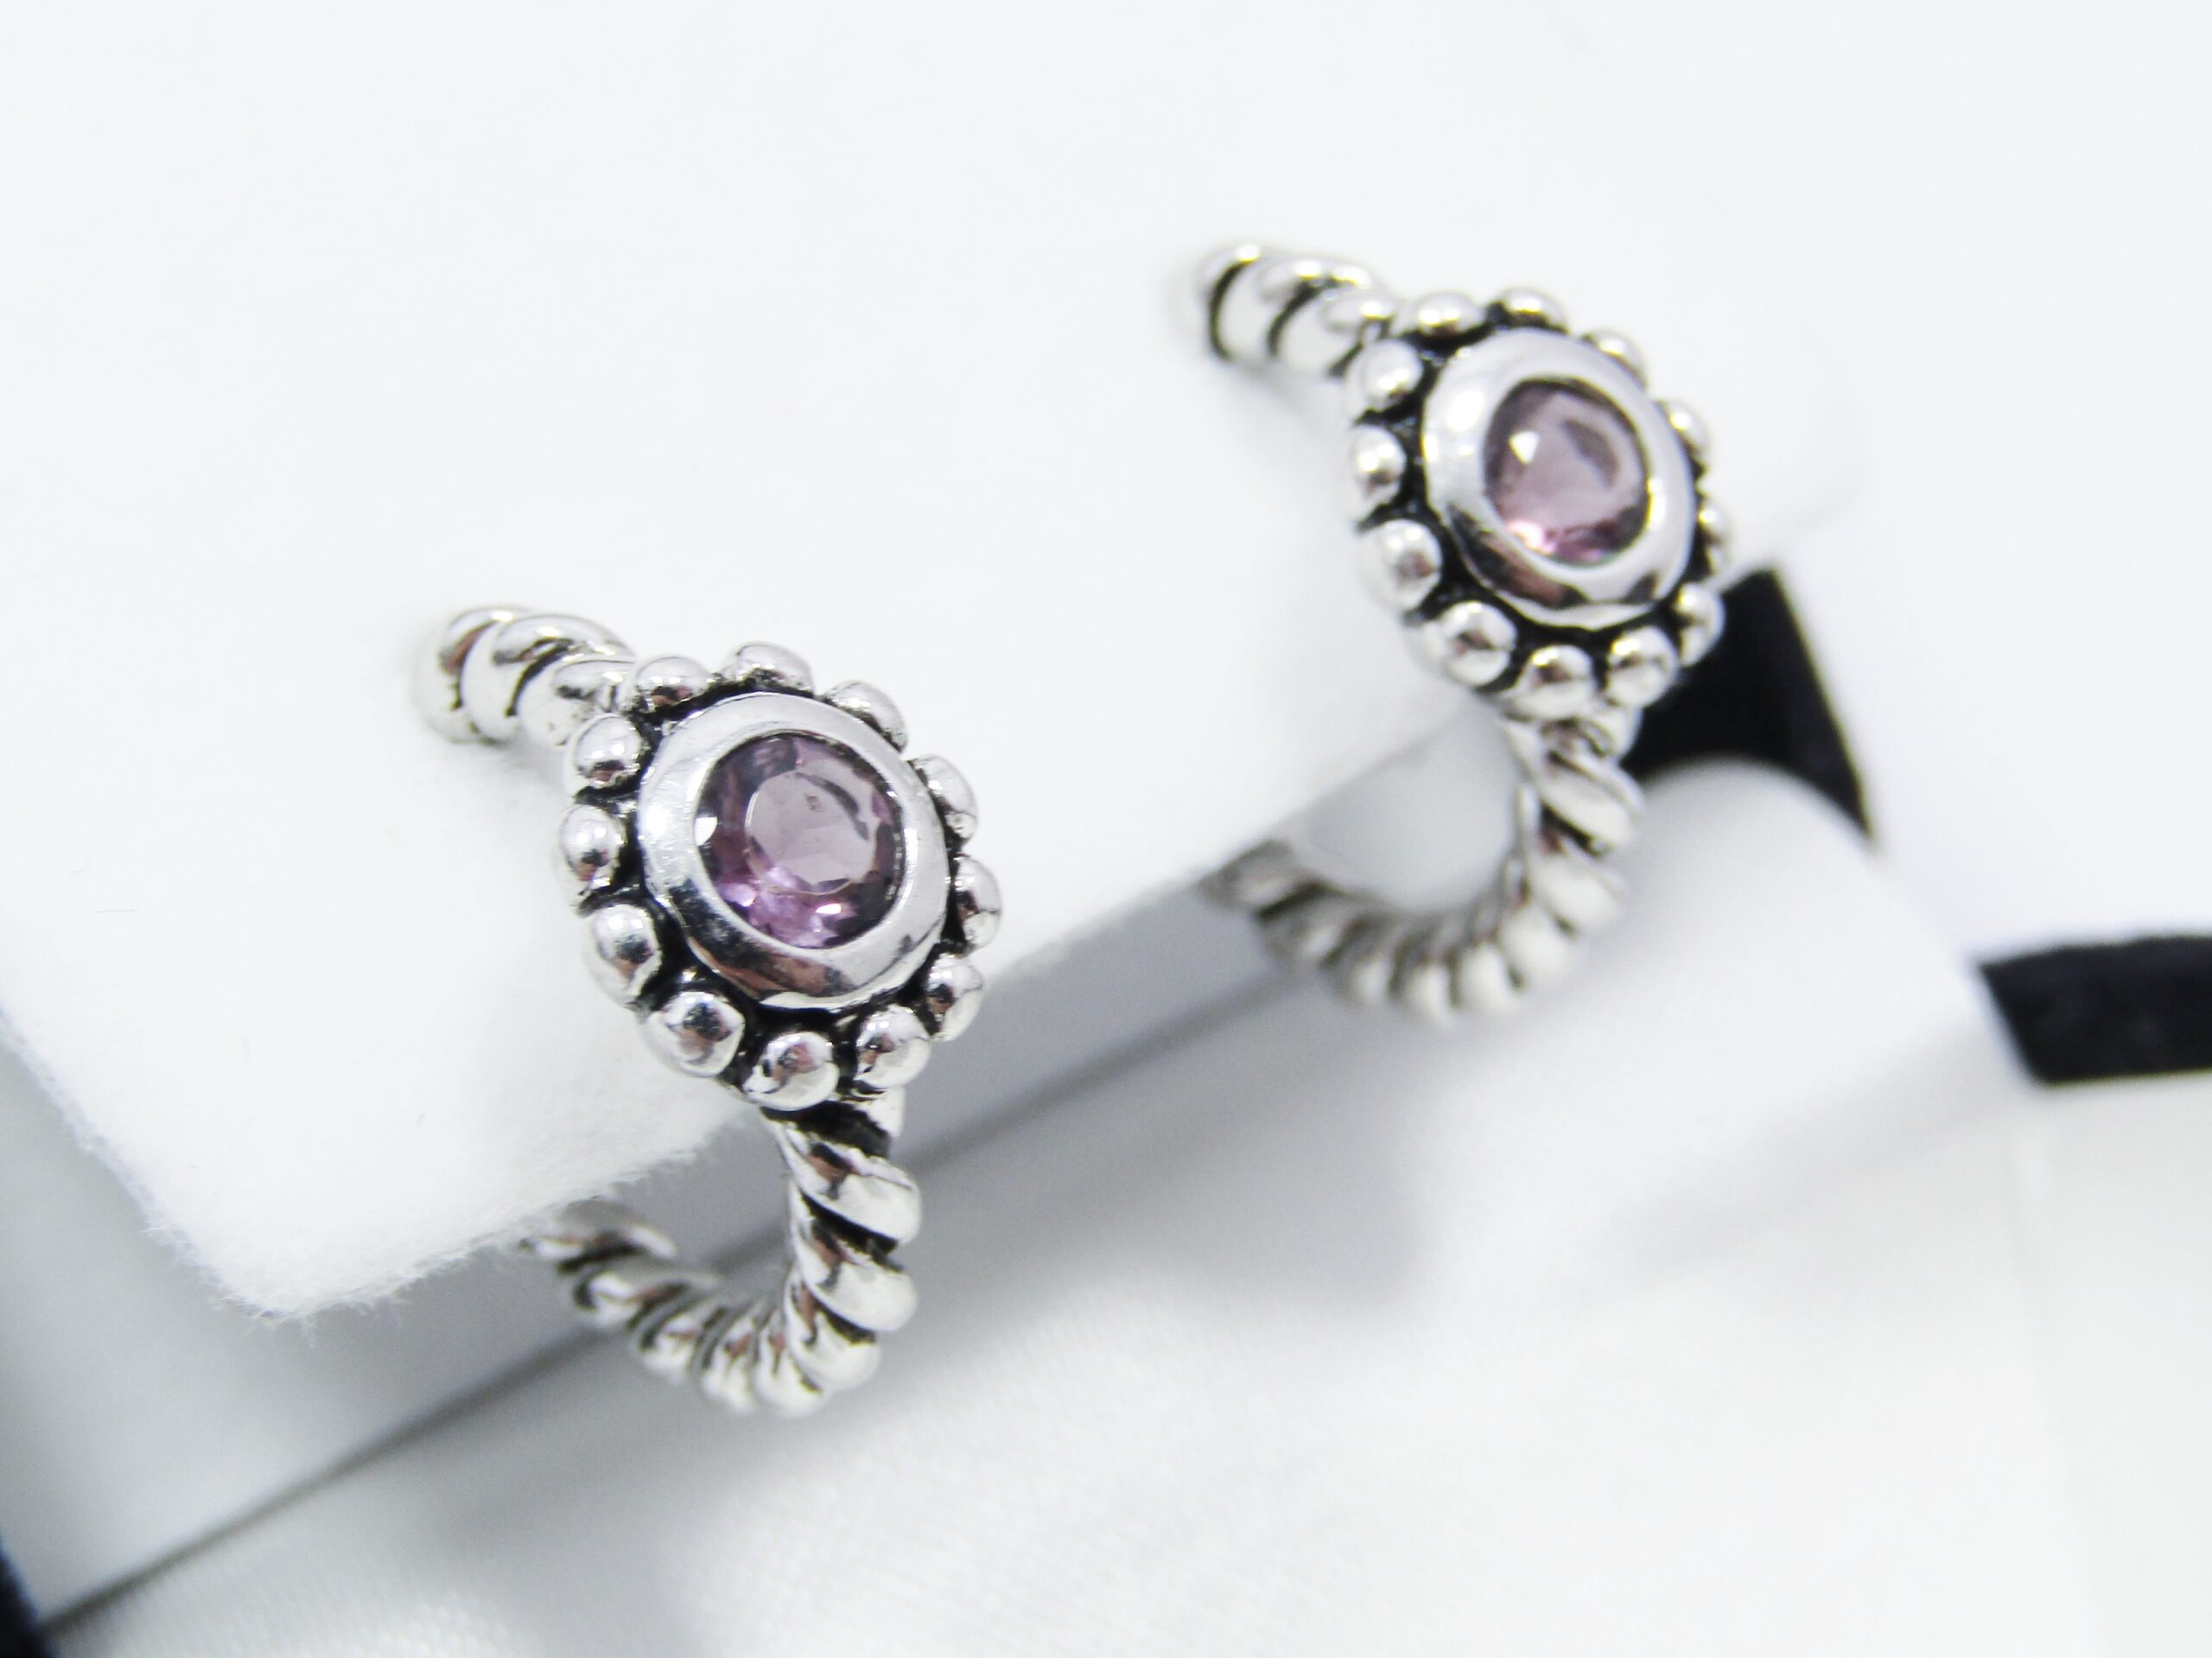 A Lovely Pair of Rope Design Earrings with an Amethyst Stone in Sterling Silver.